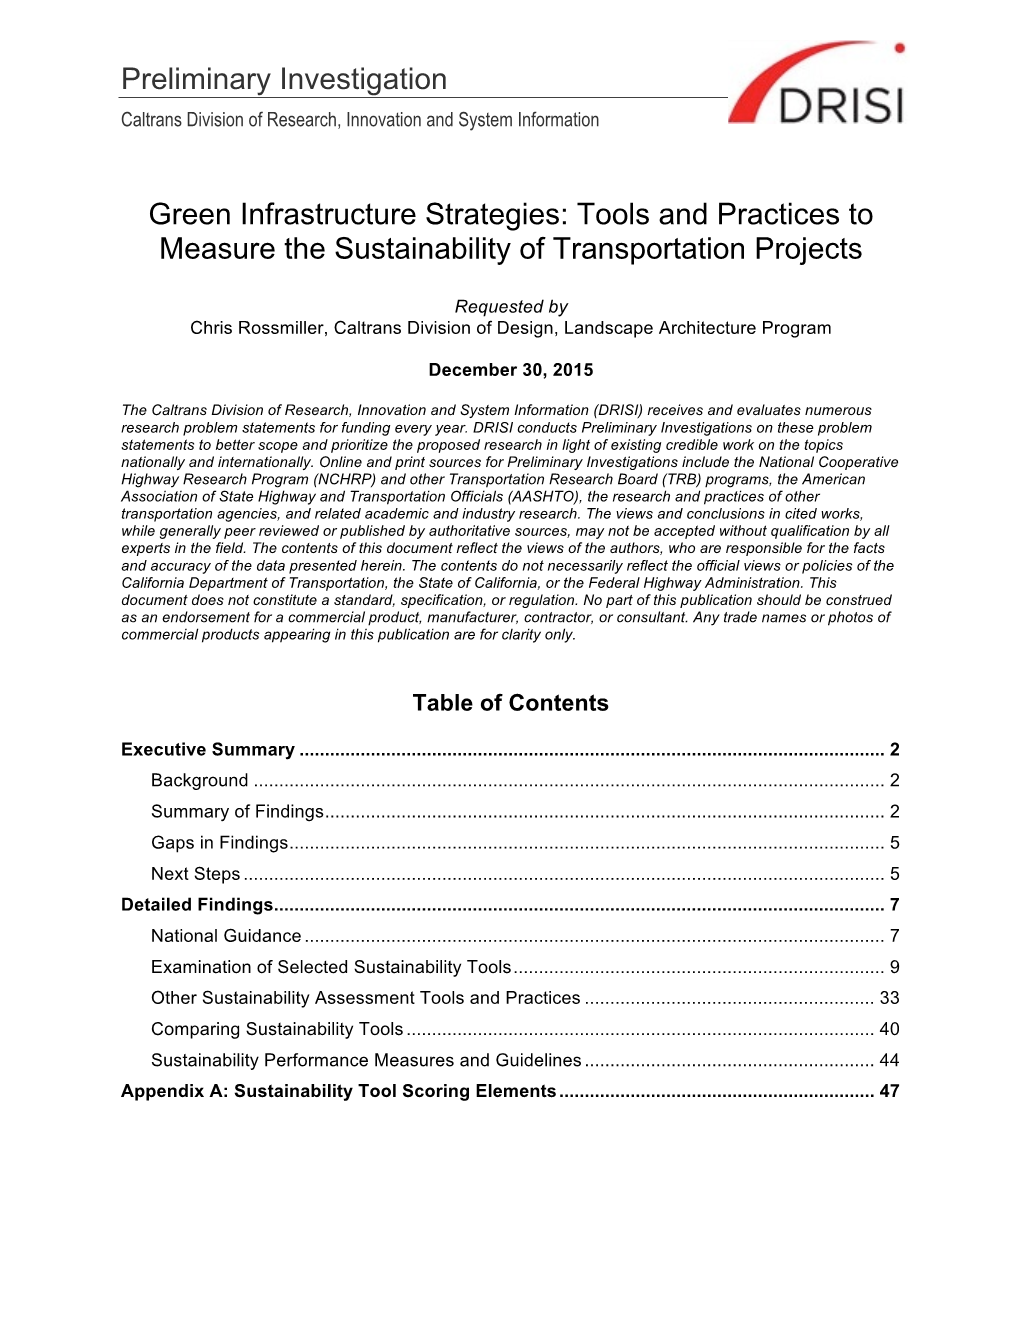 Green Infrastructure Preliminary Investigation 12-30-15